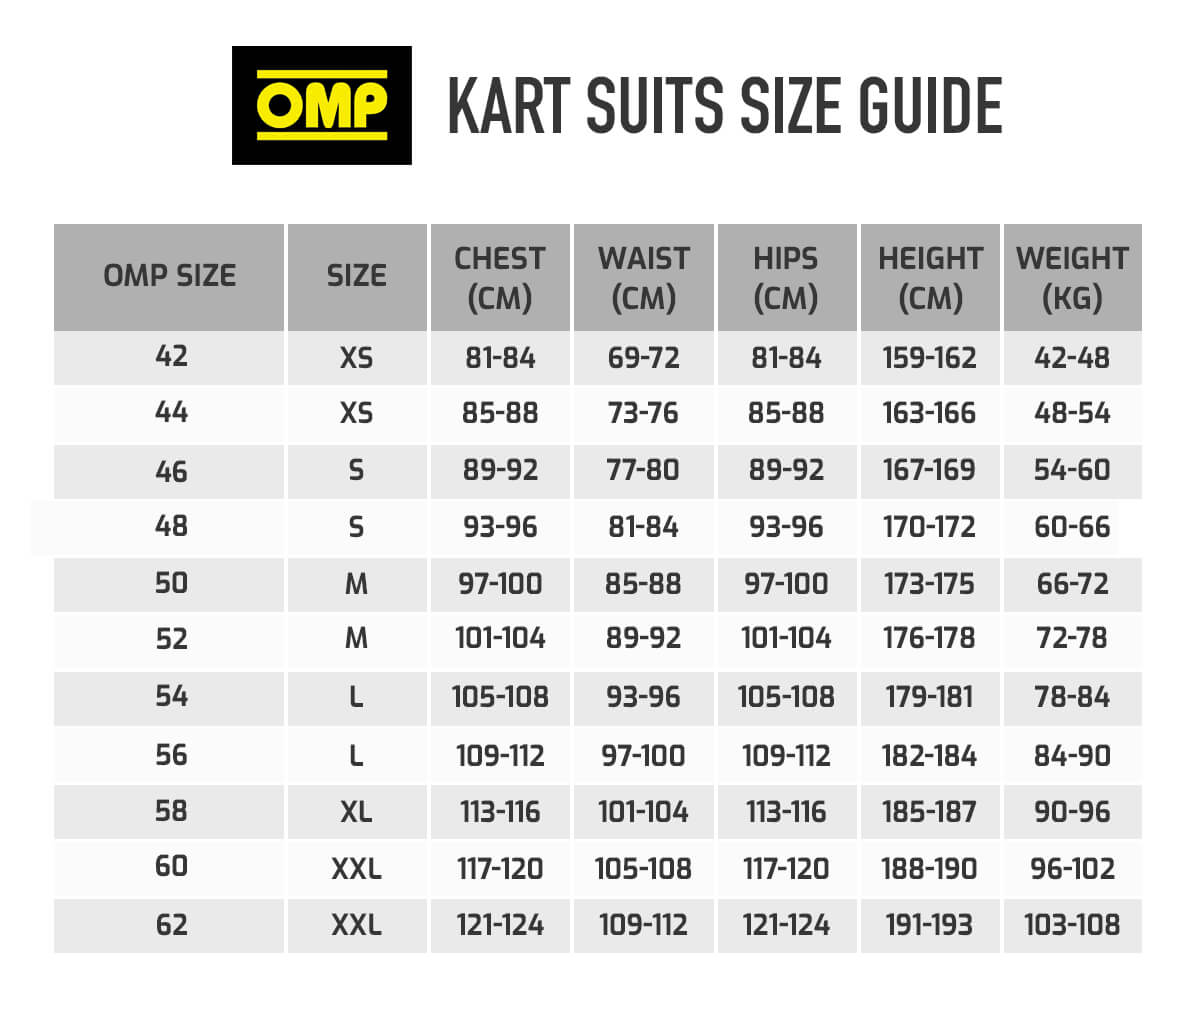 OMP KS-3 Suit Black White Size 60 Go Karting Racing Sport Overall CIK 3 Layers 